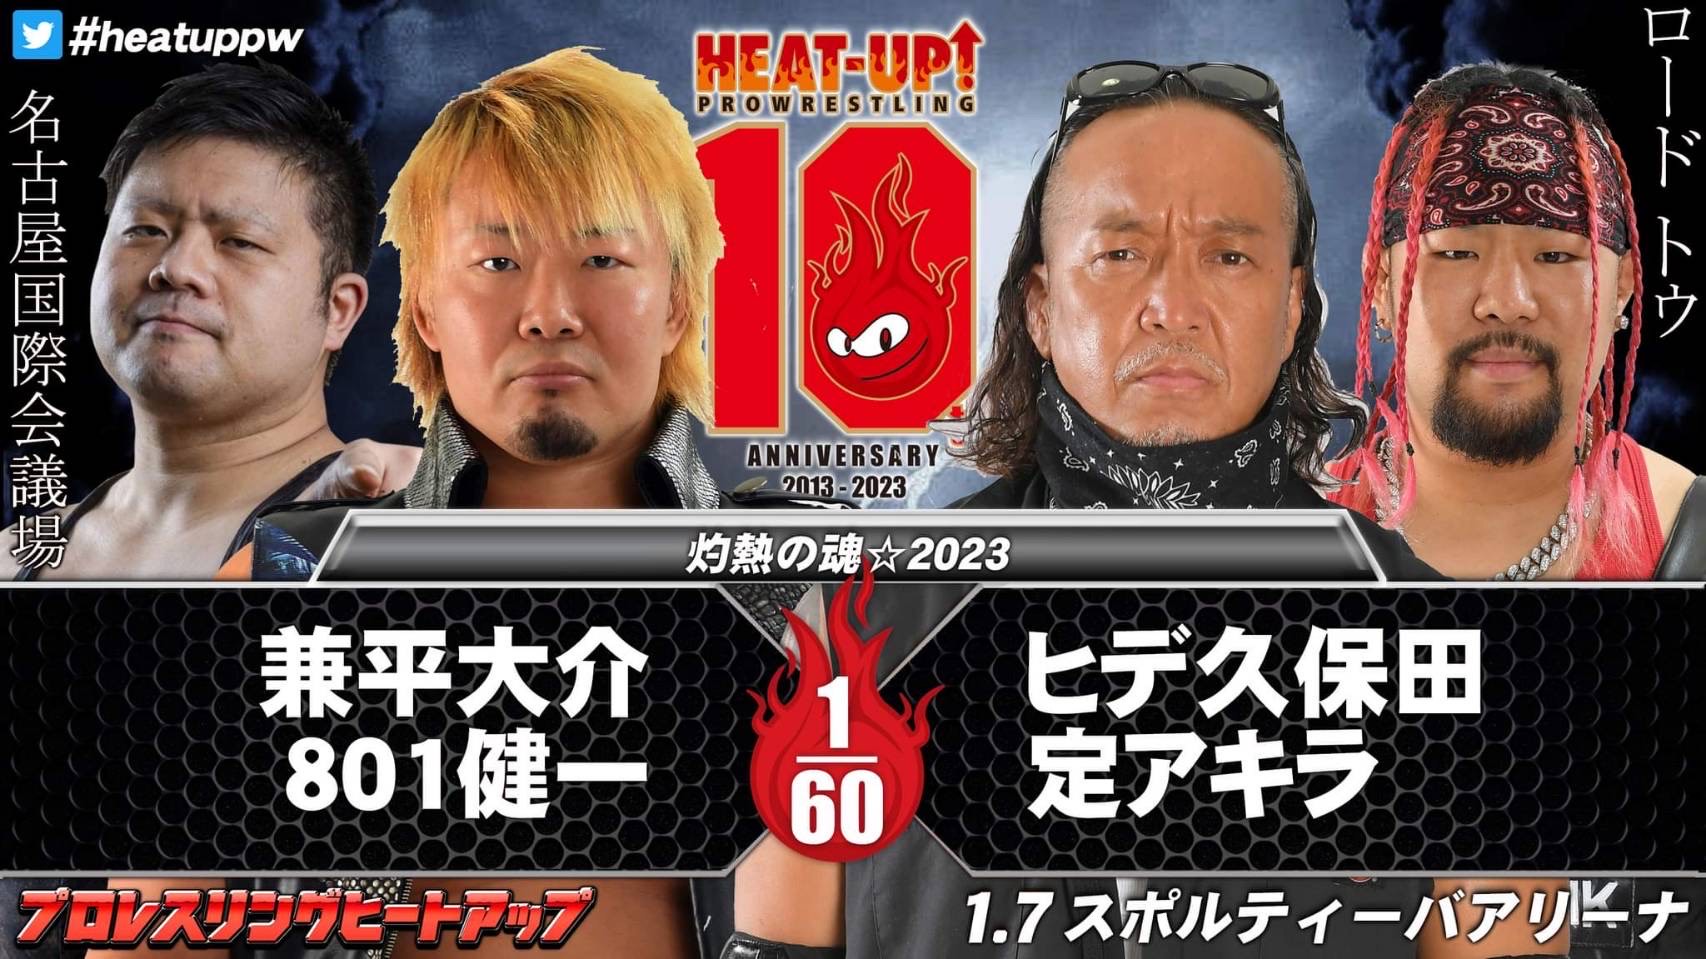 The Harold Williams Blog: [HEAT UP][PREVIEW] 1/7 LIVE Event